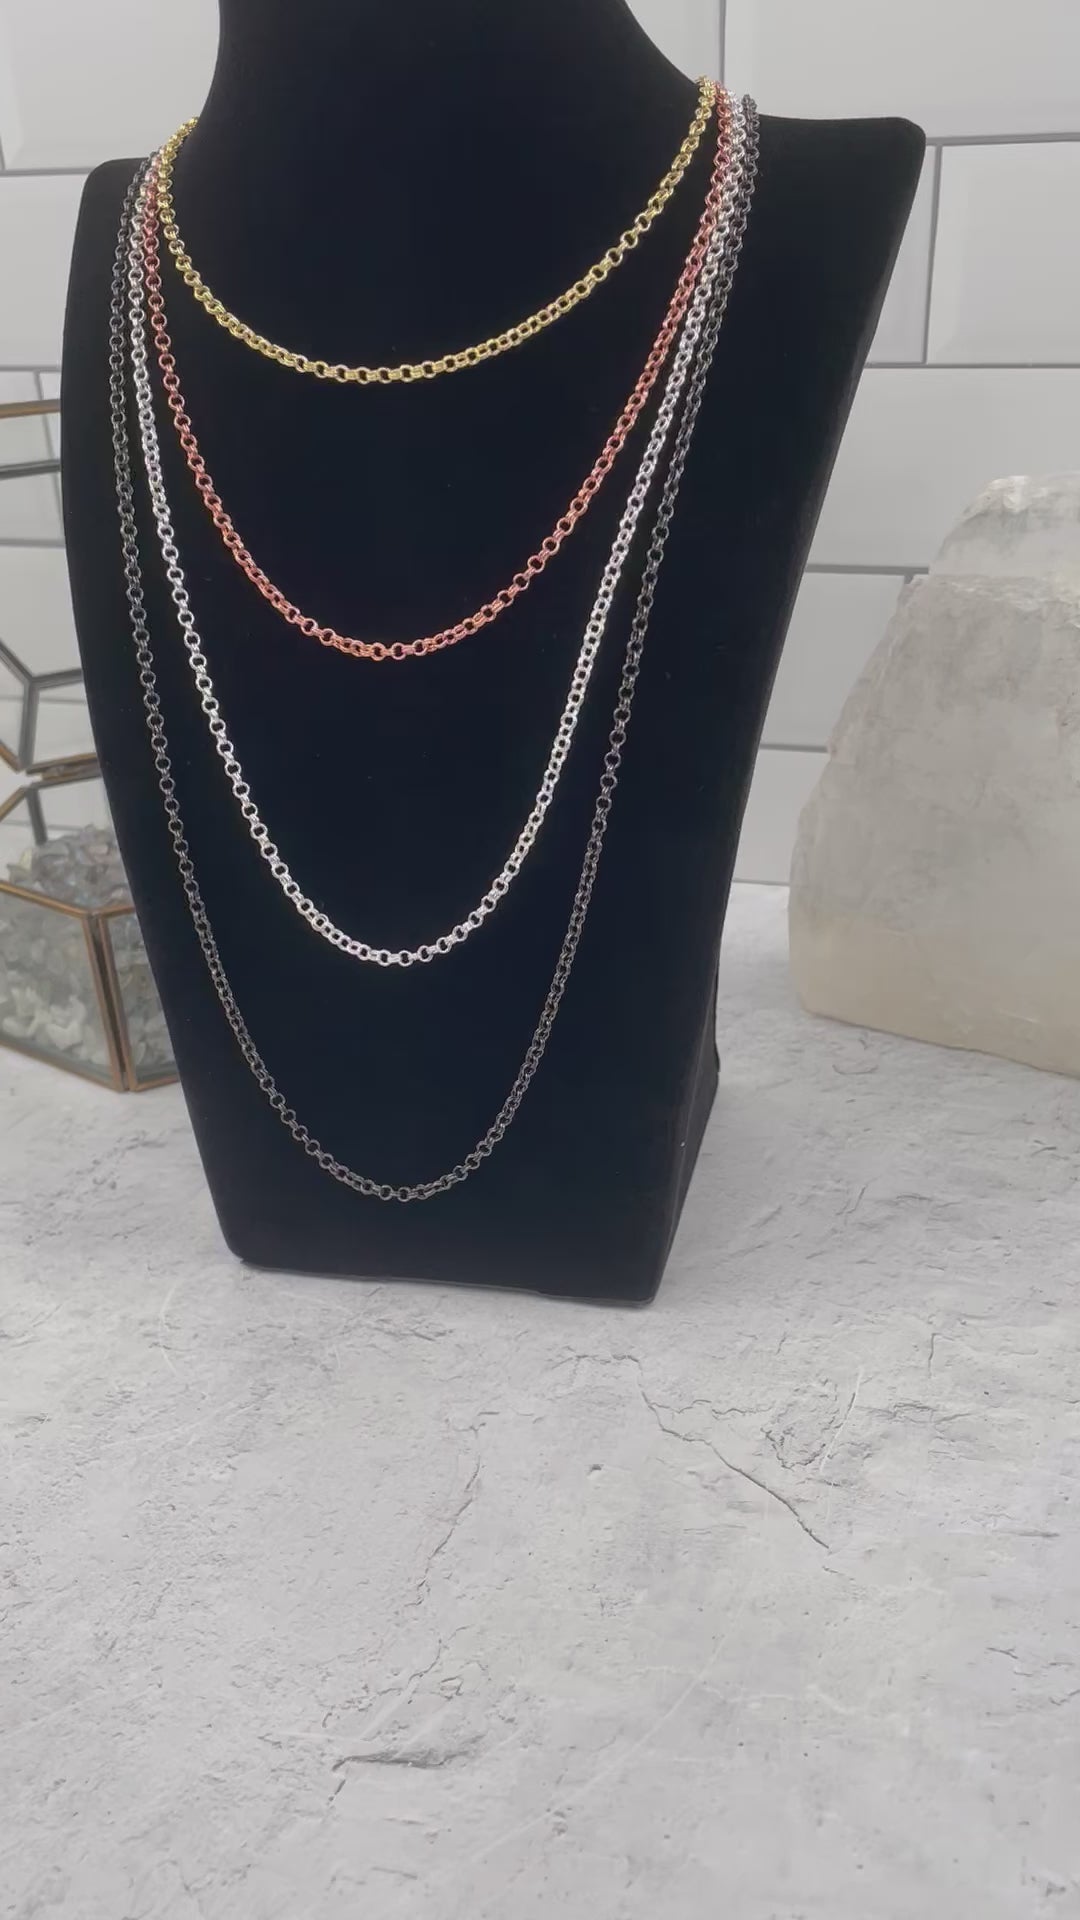 Double Chain Necklace - You Select Style